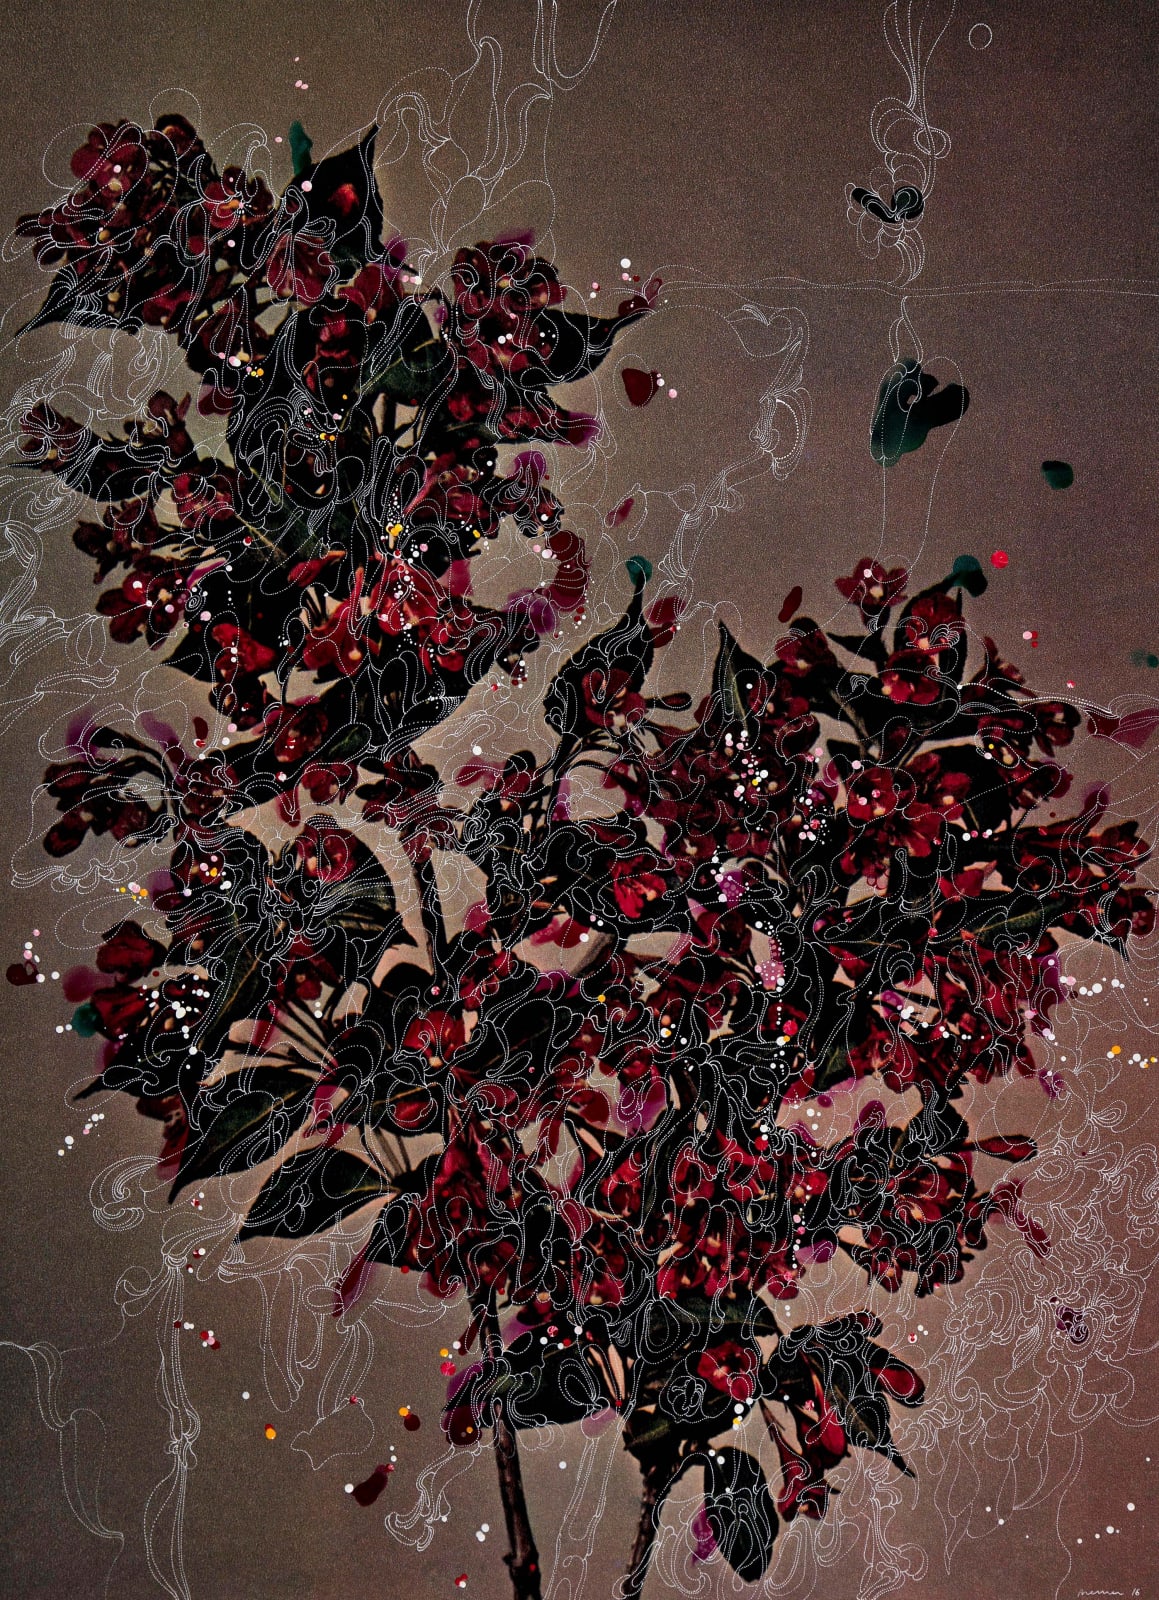 Cranberry colored diervilla flowers (bush honeysuckle) with hand painted embellishments, by Sebastiaan Bremer